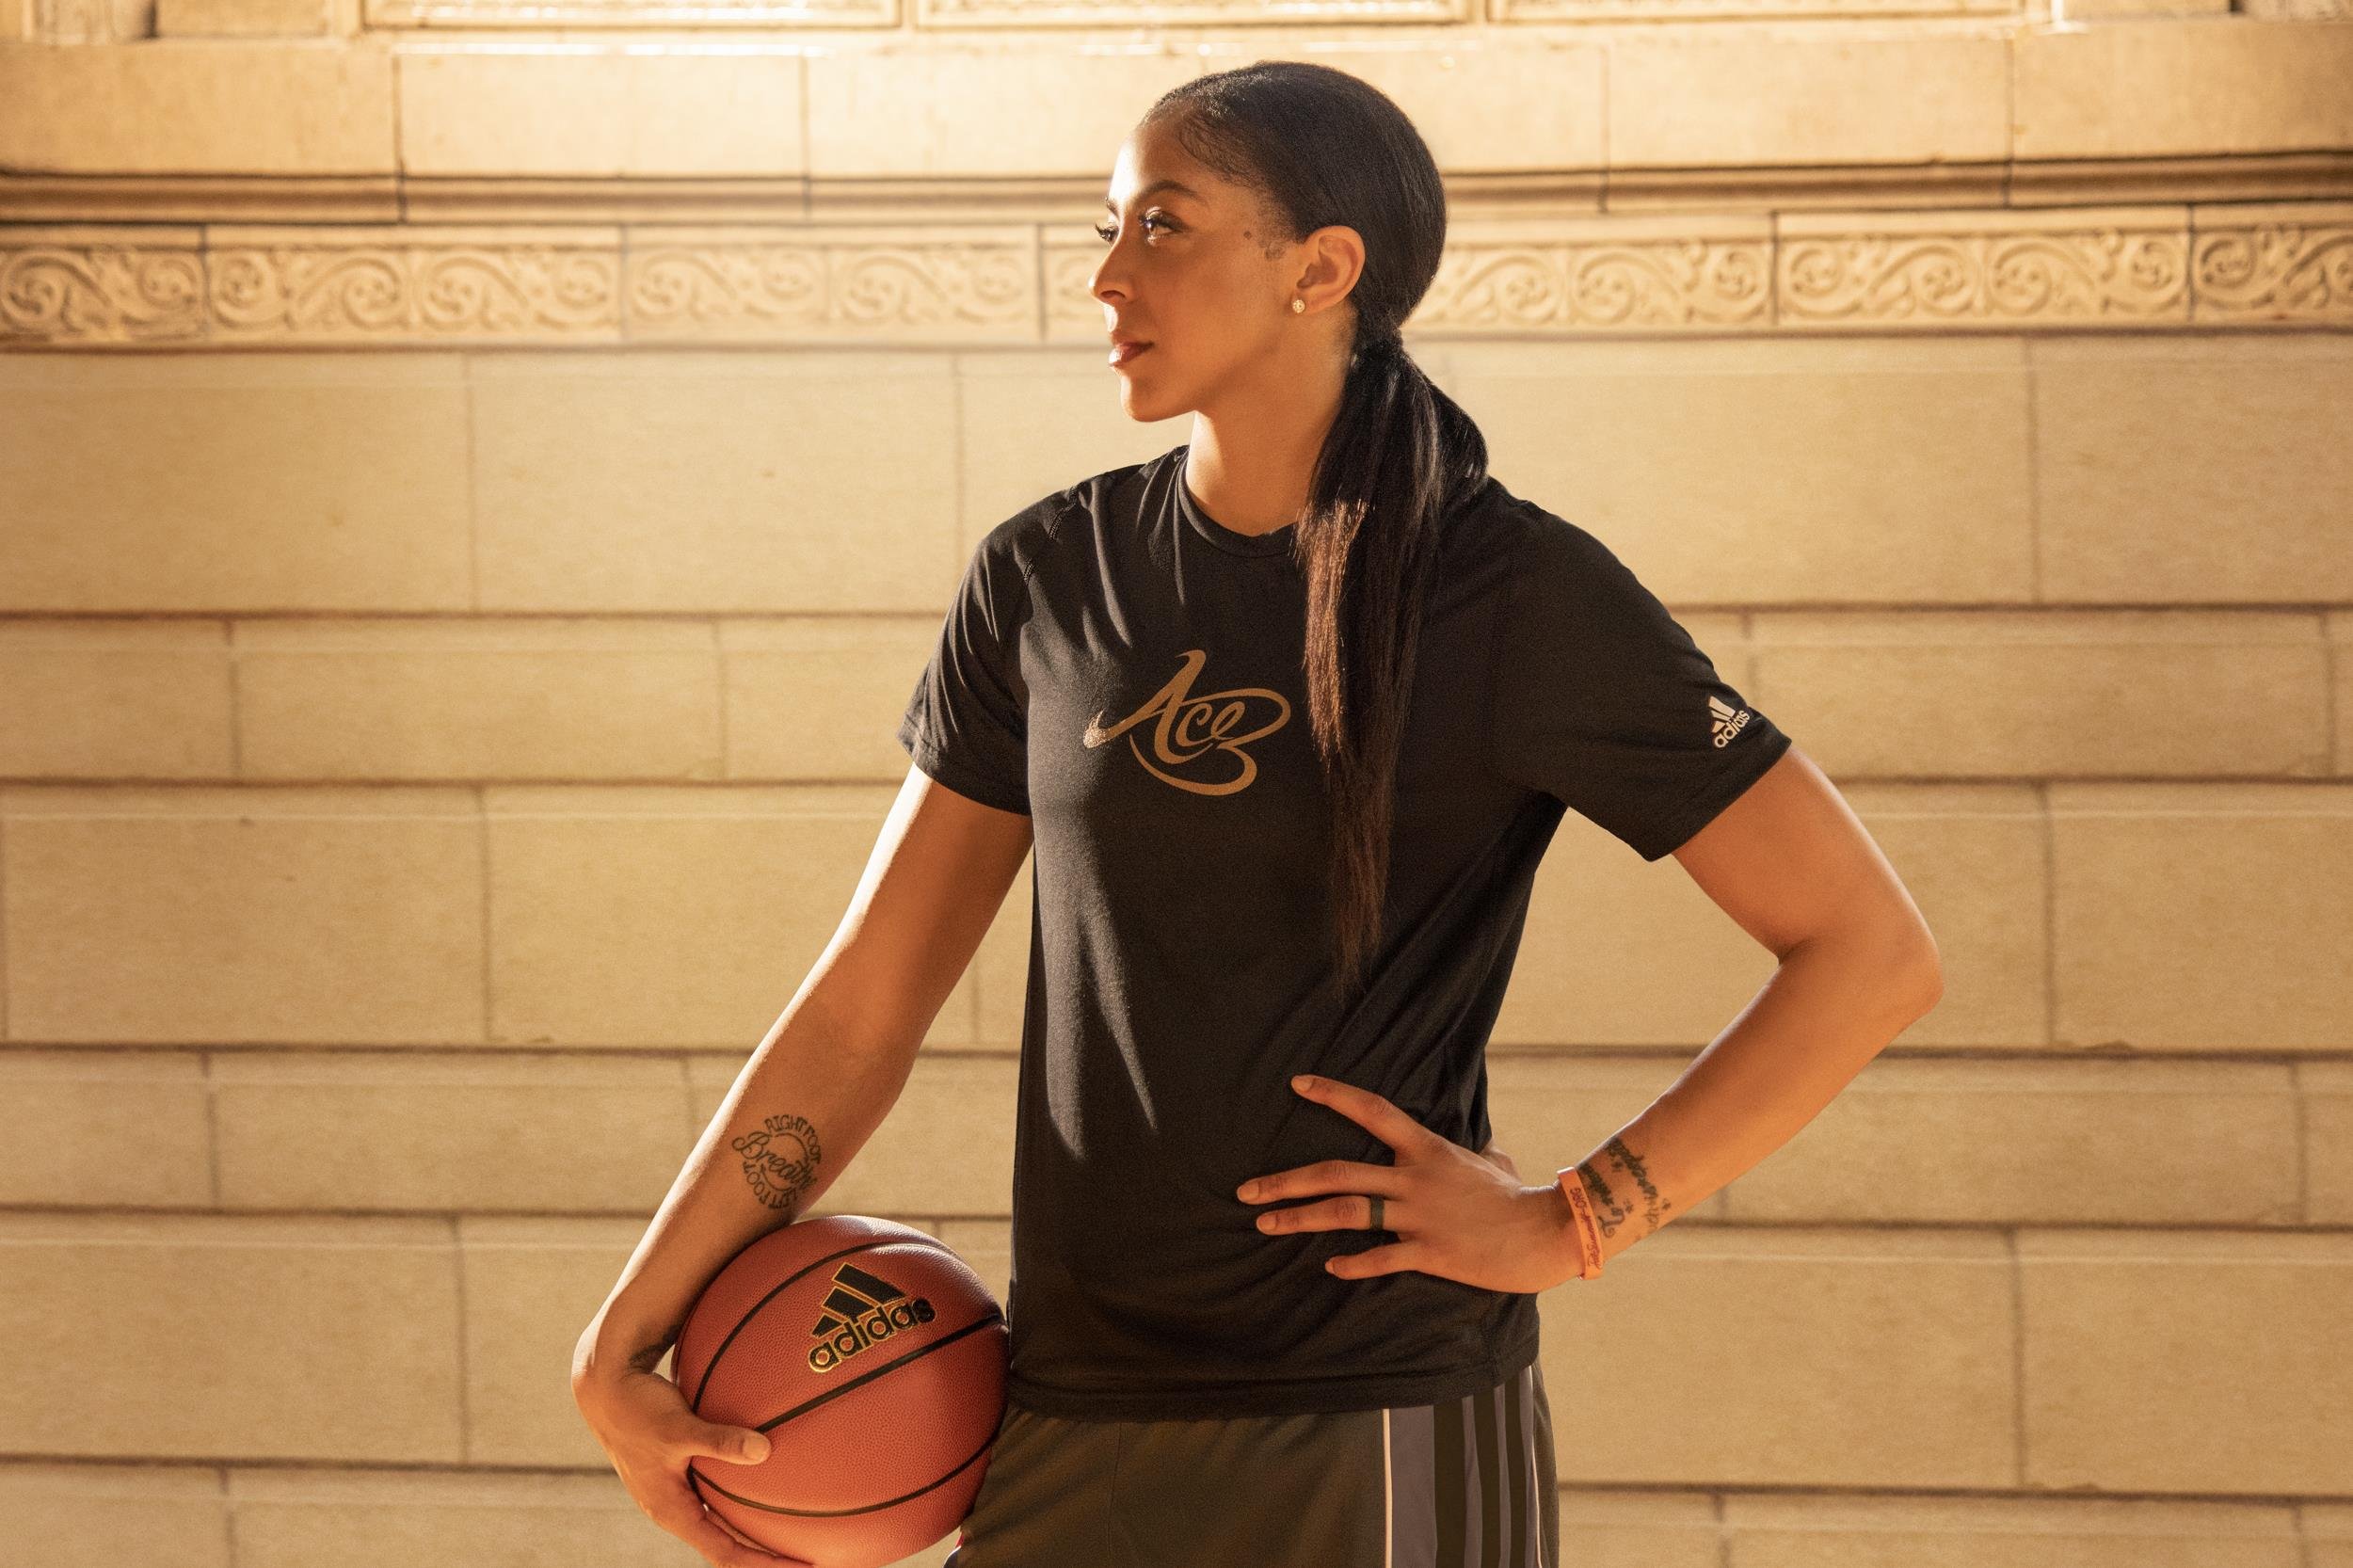 The City of Chicago Proclaims September 16 “Candace Parker Day" Ahead of Her Newest adidas Collection